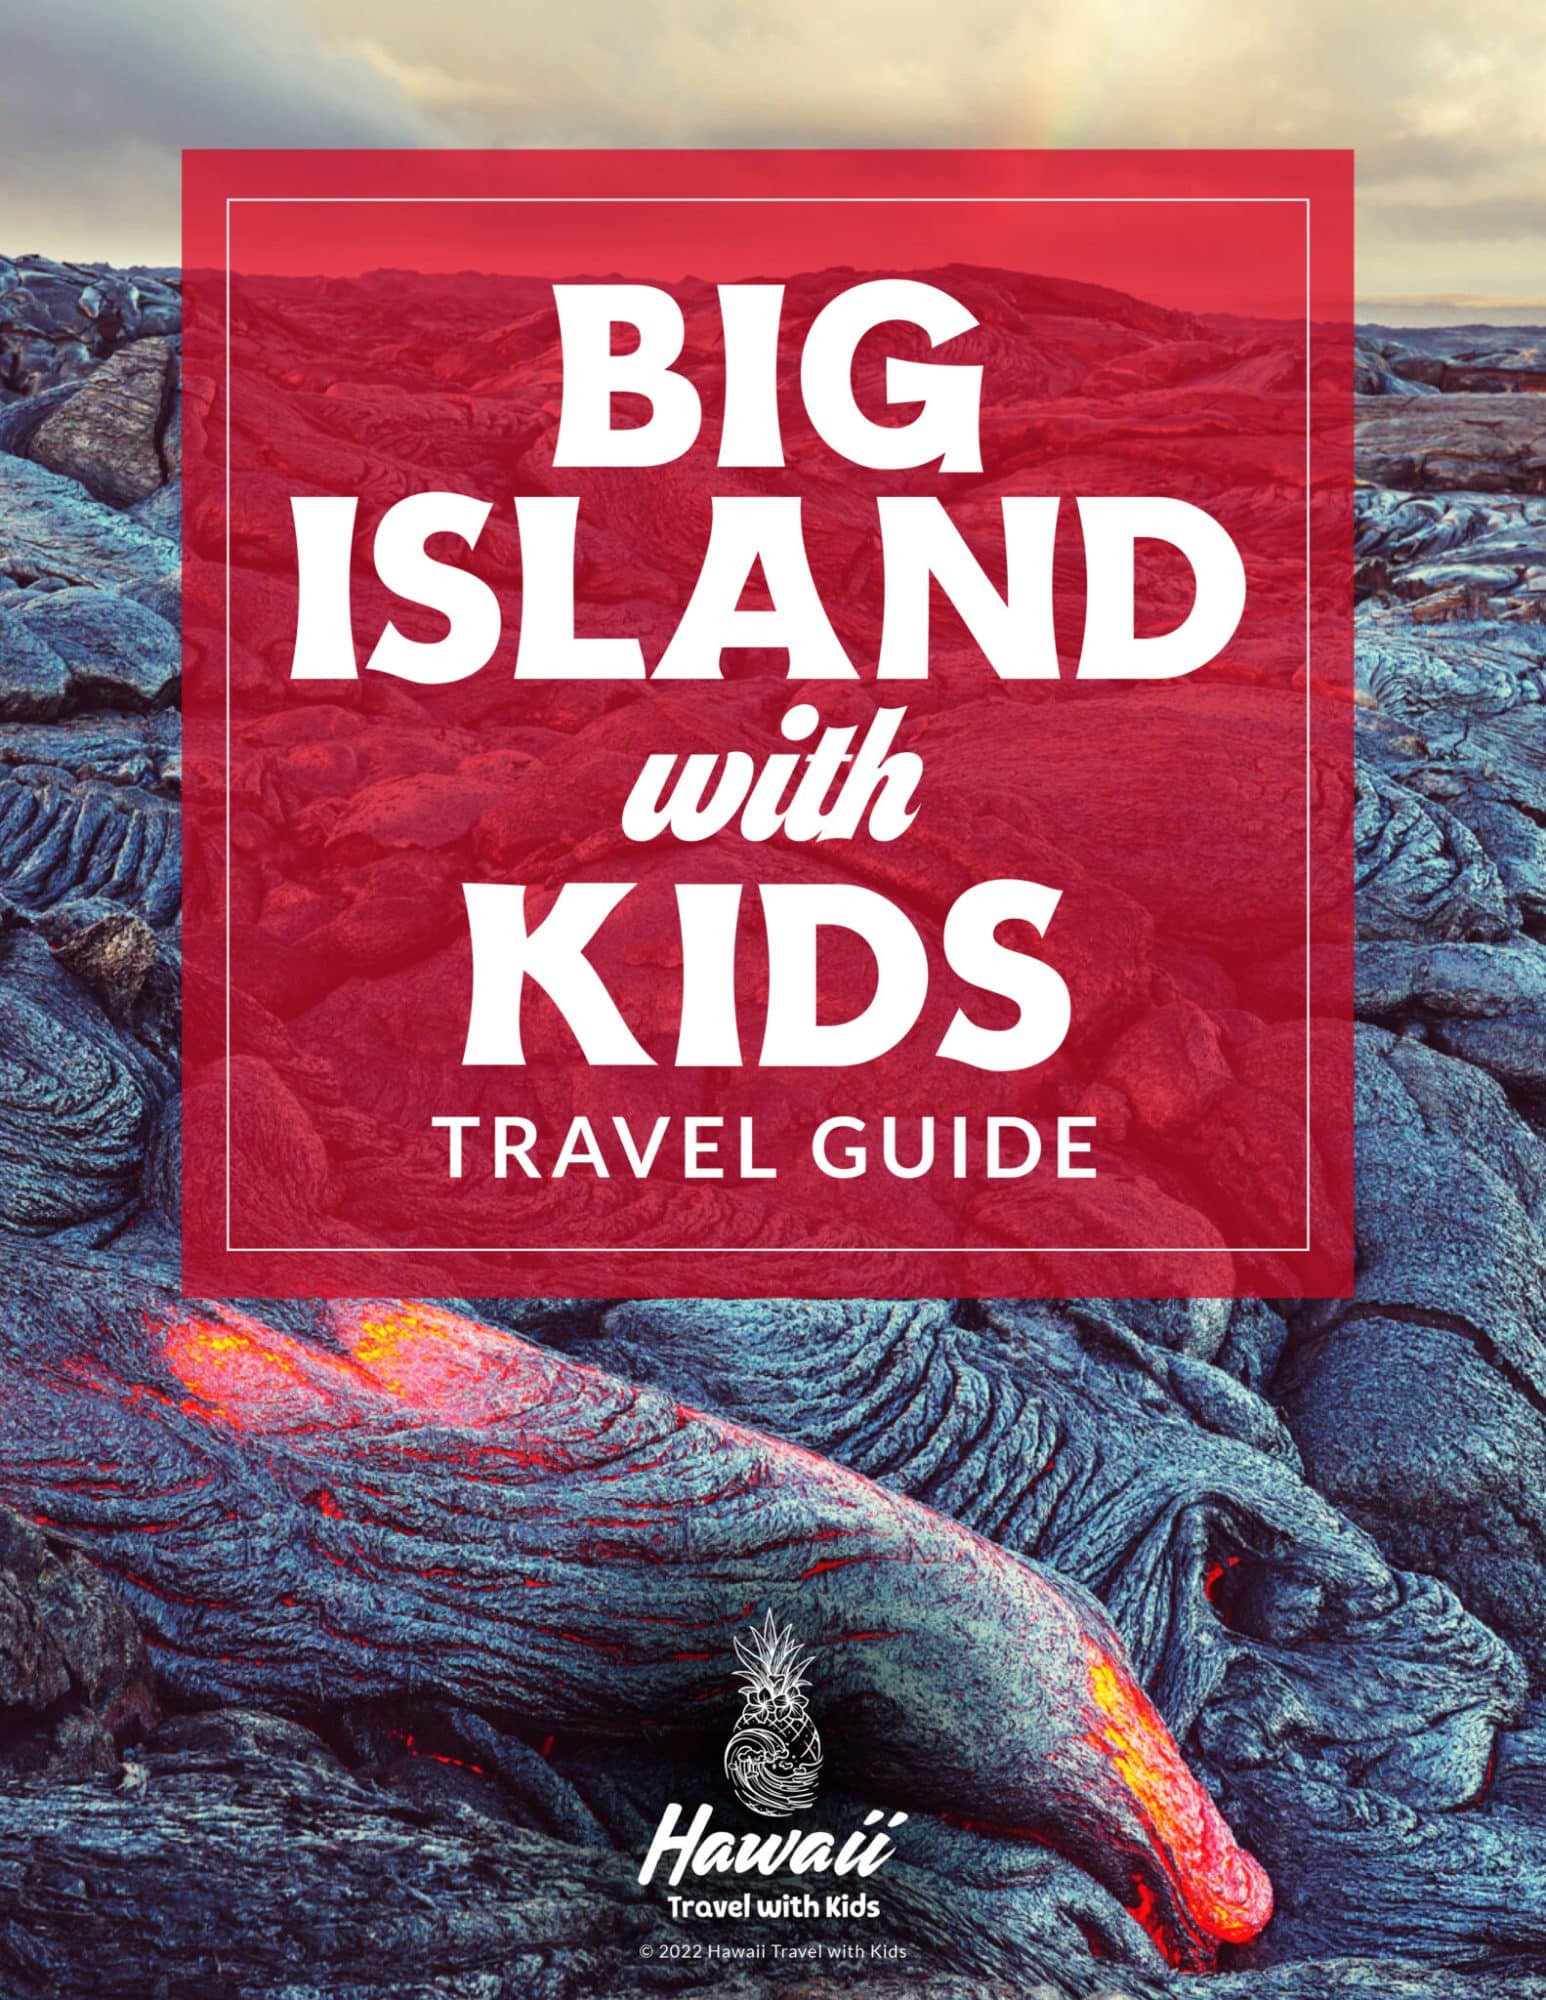 Big Island with Kids Travel Guide